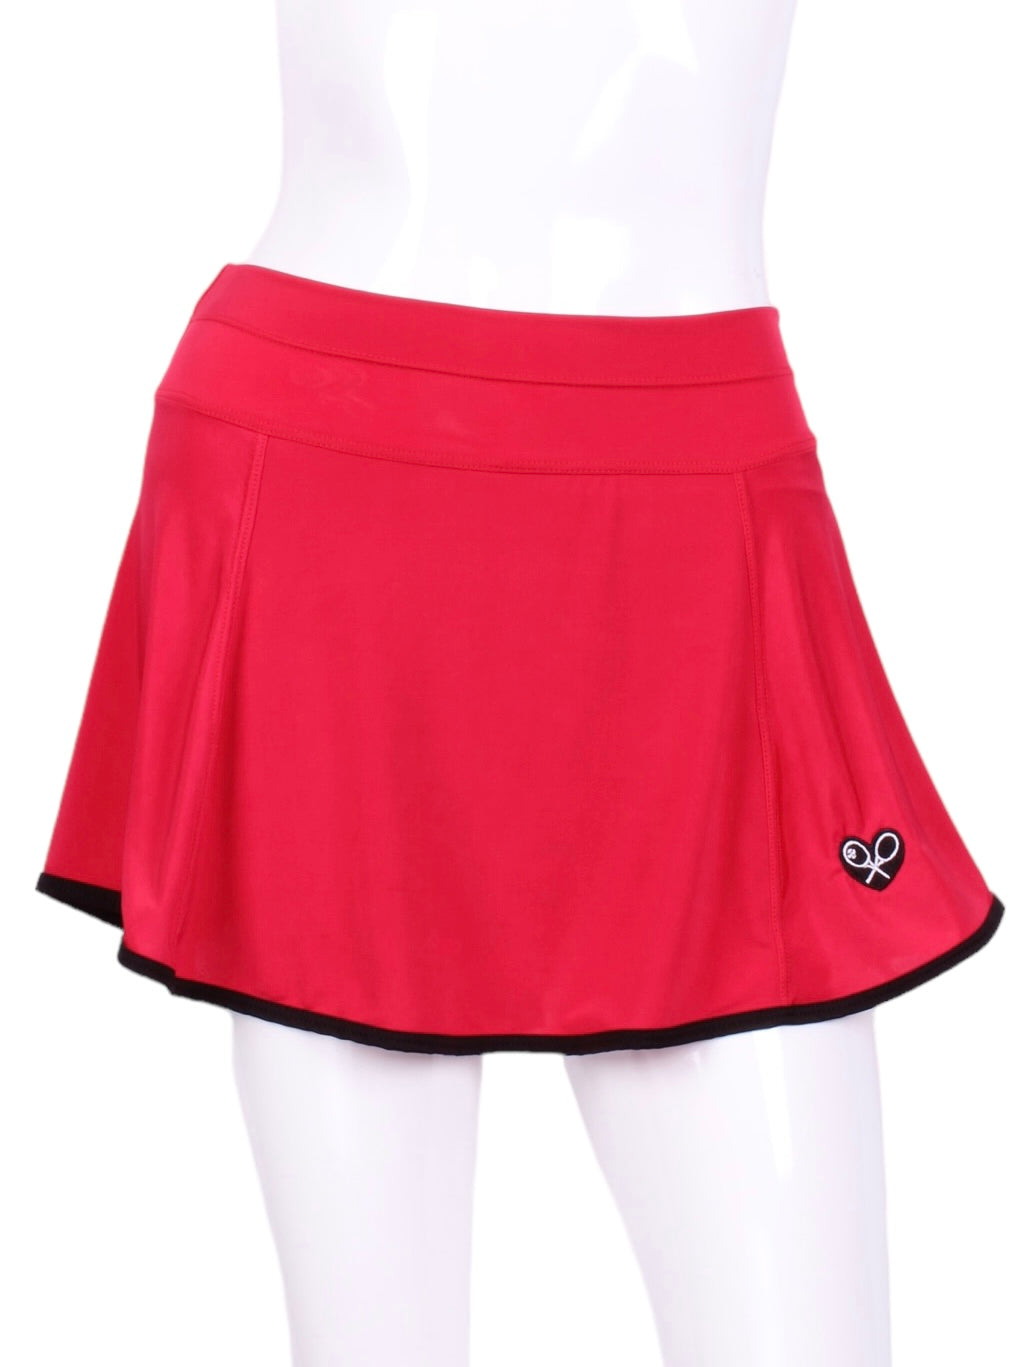 The Gladiator Skirt Pinky Red is a remarkable piece of sportswear that combines both style and functionality in the realm of tennis fashion. This tennis skirt is crafted with meticulous attention to detail, using the finest quality materials to provide an unparalleled experience for players on and off the court.